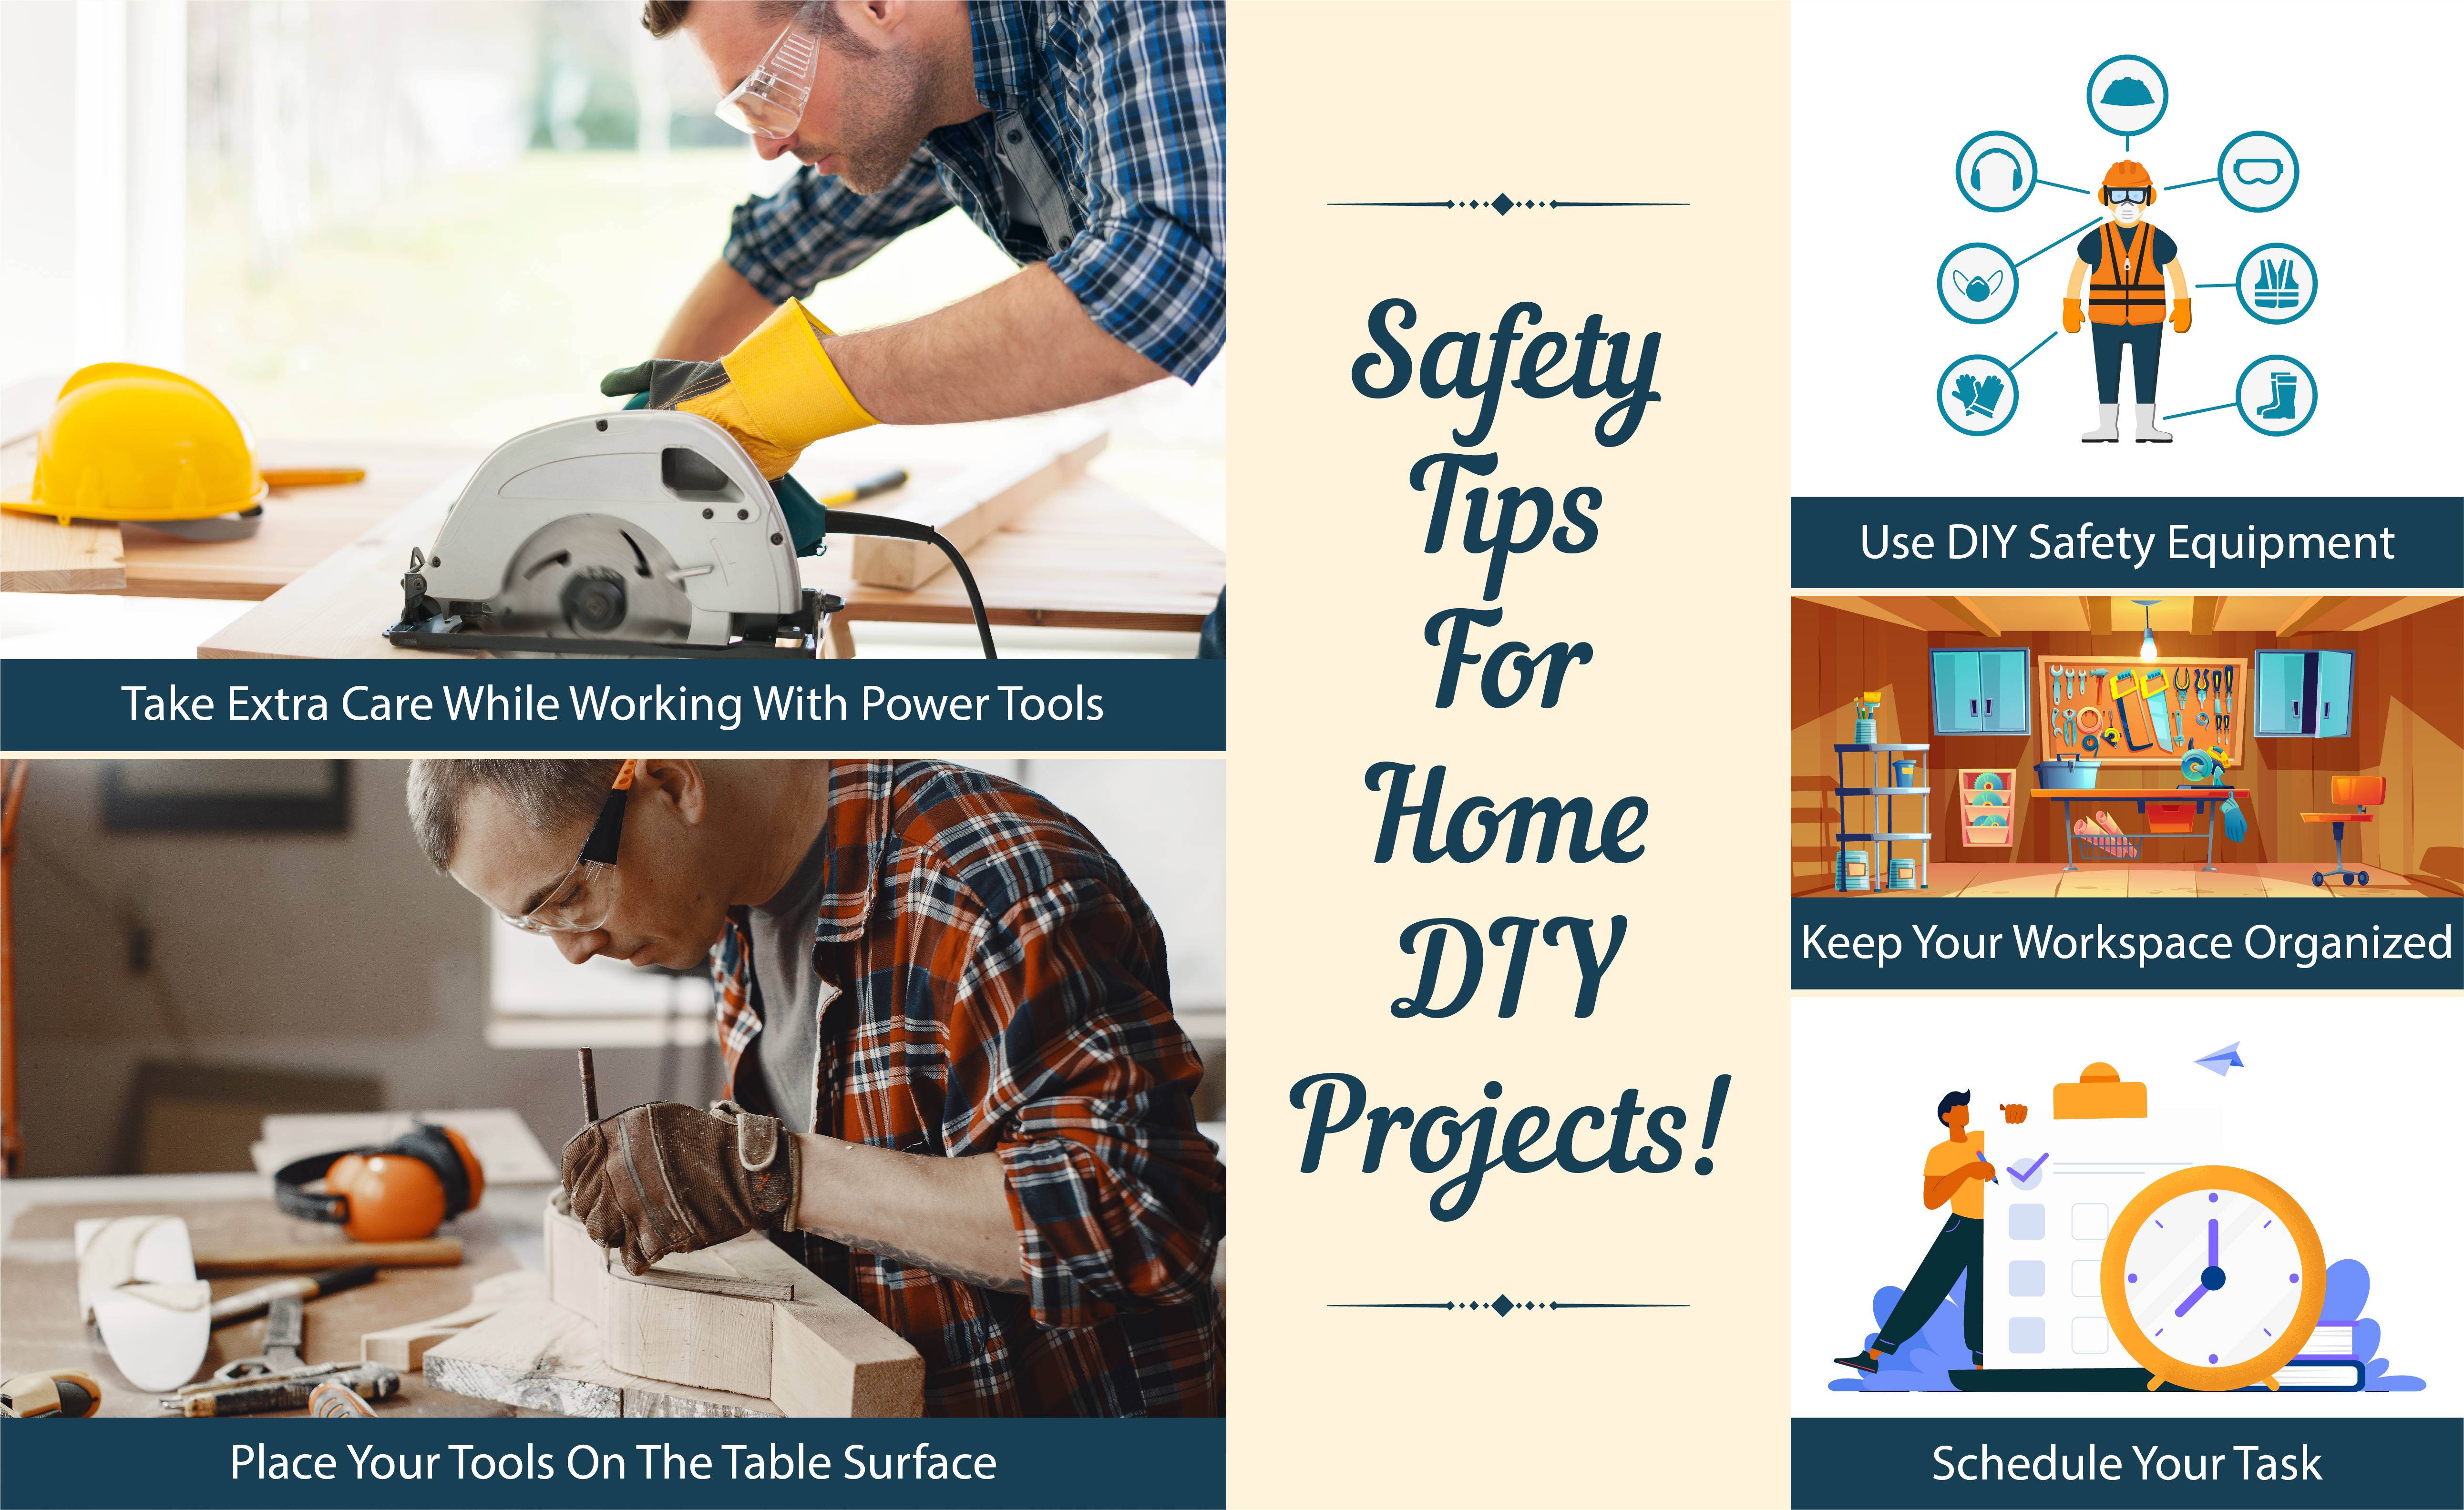 Safety Tips for Home DIY Projects